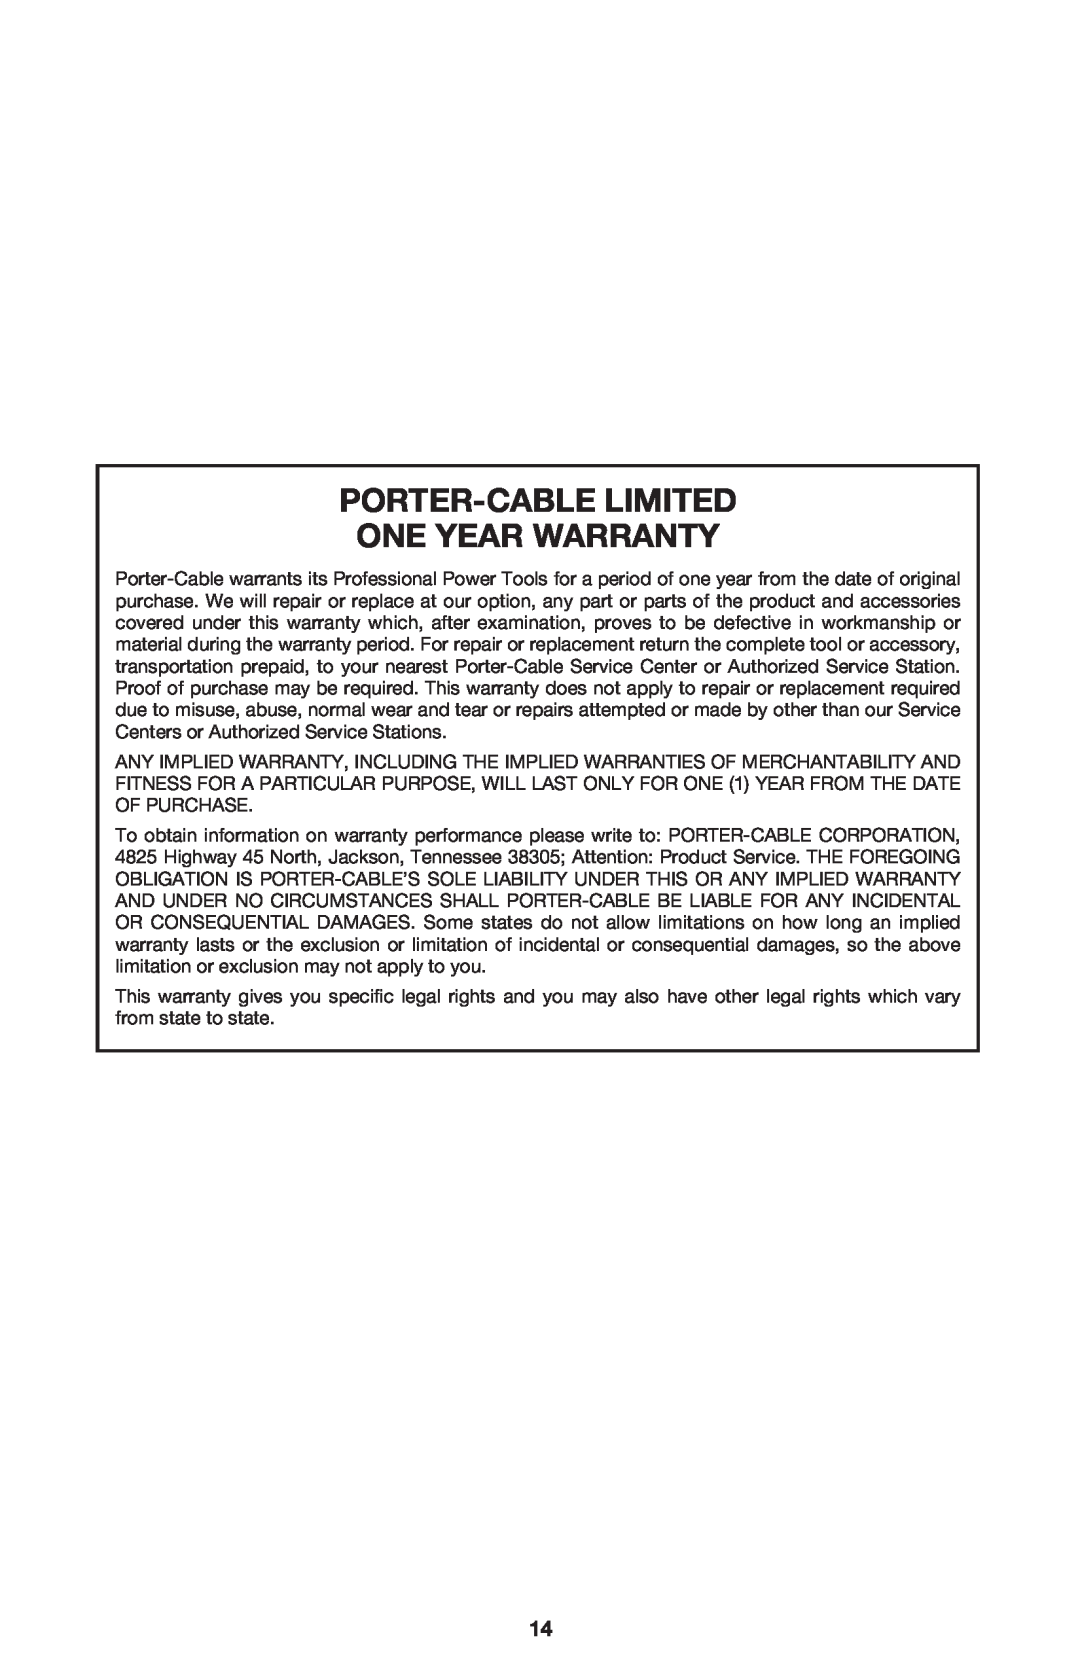 Porter-Cable 7536, 7537 instruction manual Porter-Cable Limited One Year Warranty 